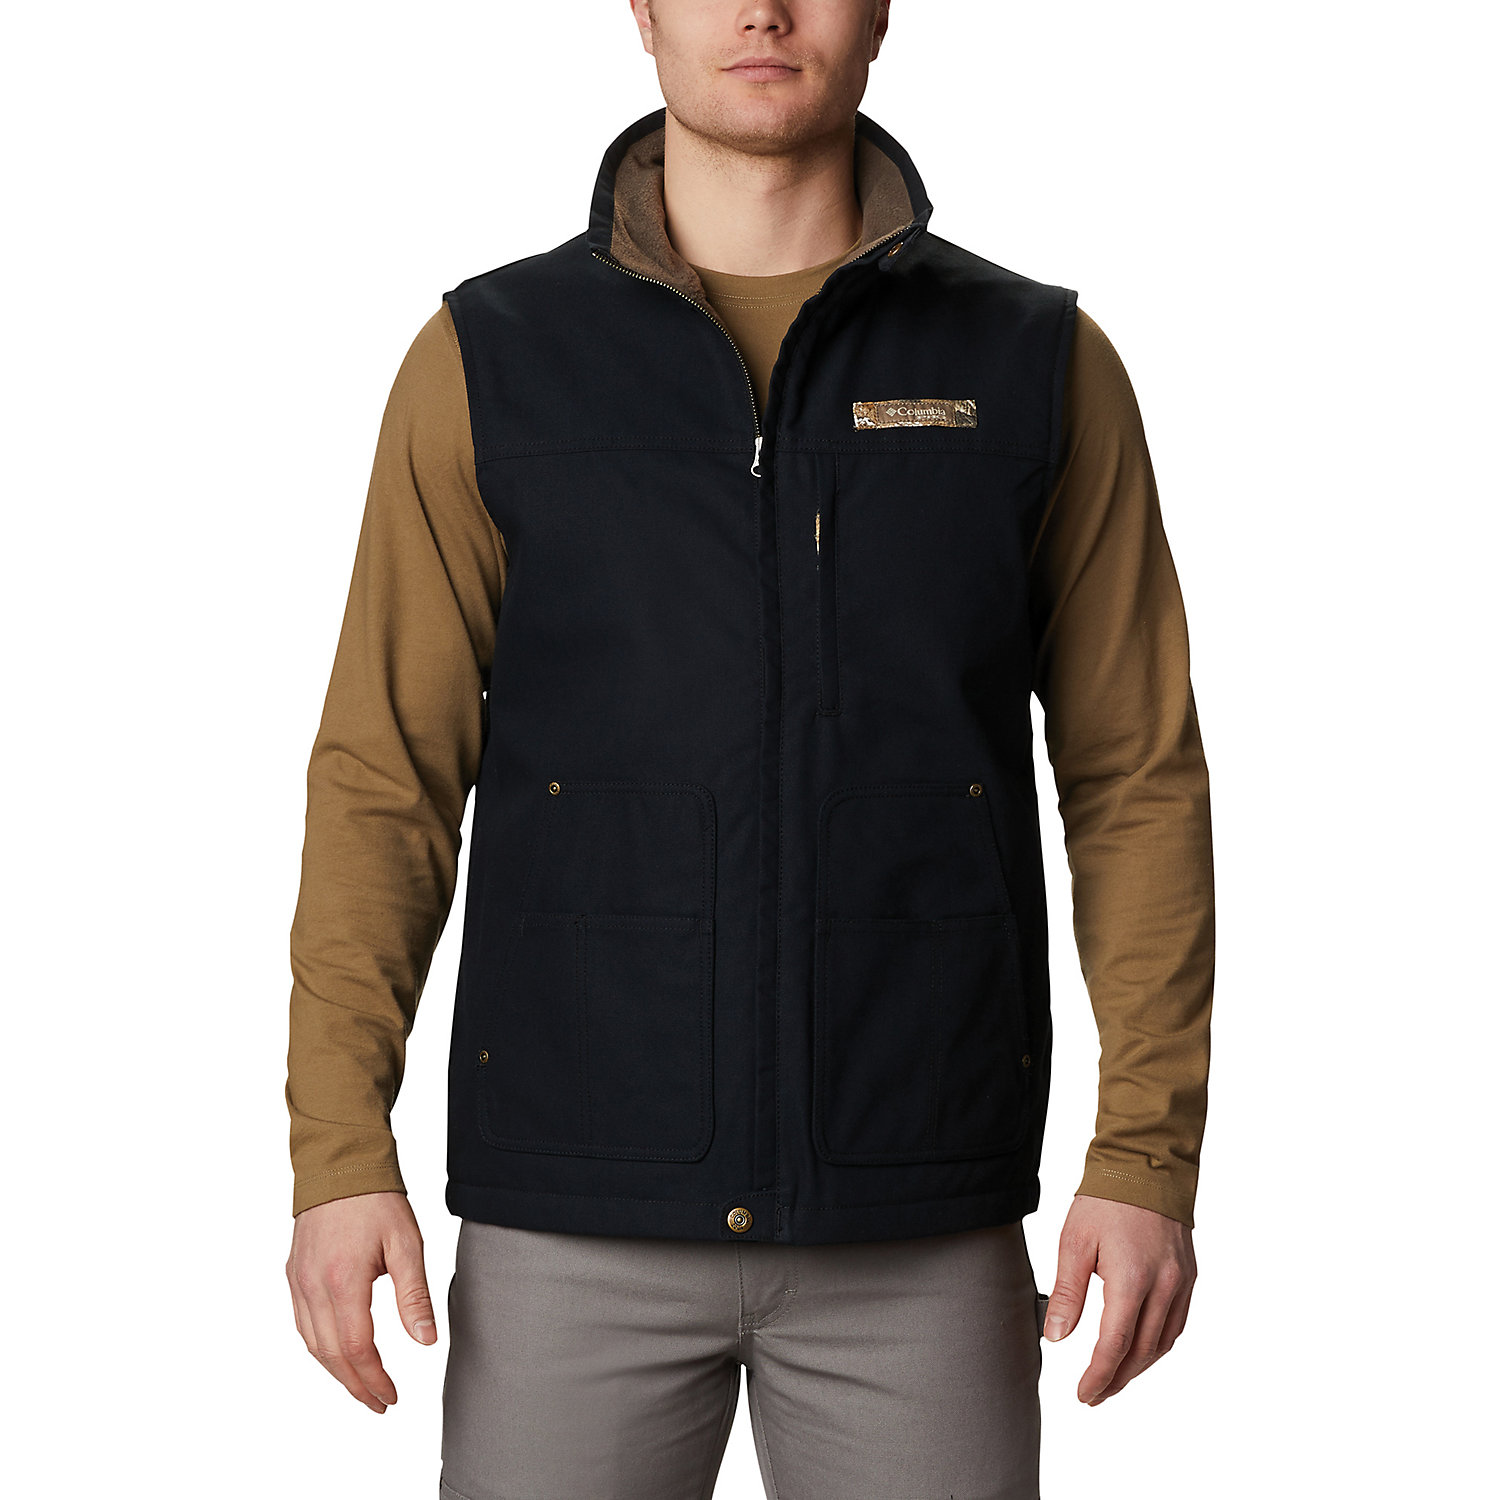 Columbia Mens Roughtail Work Vest